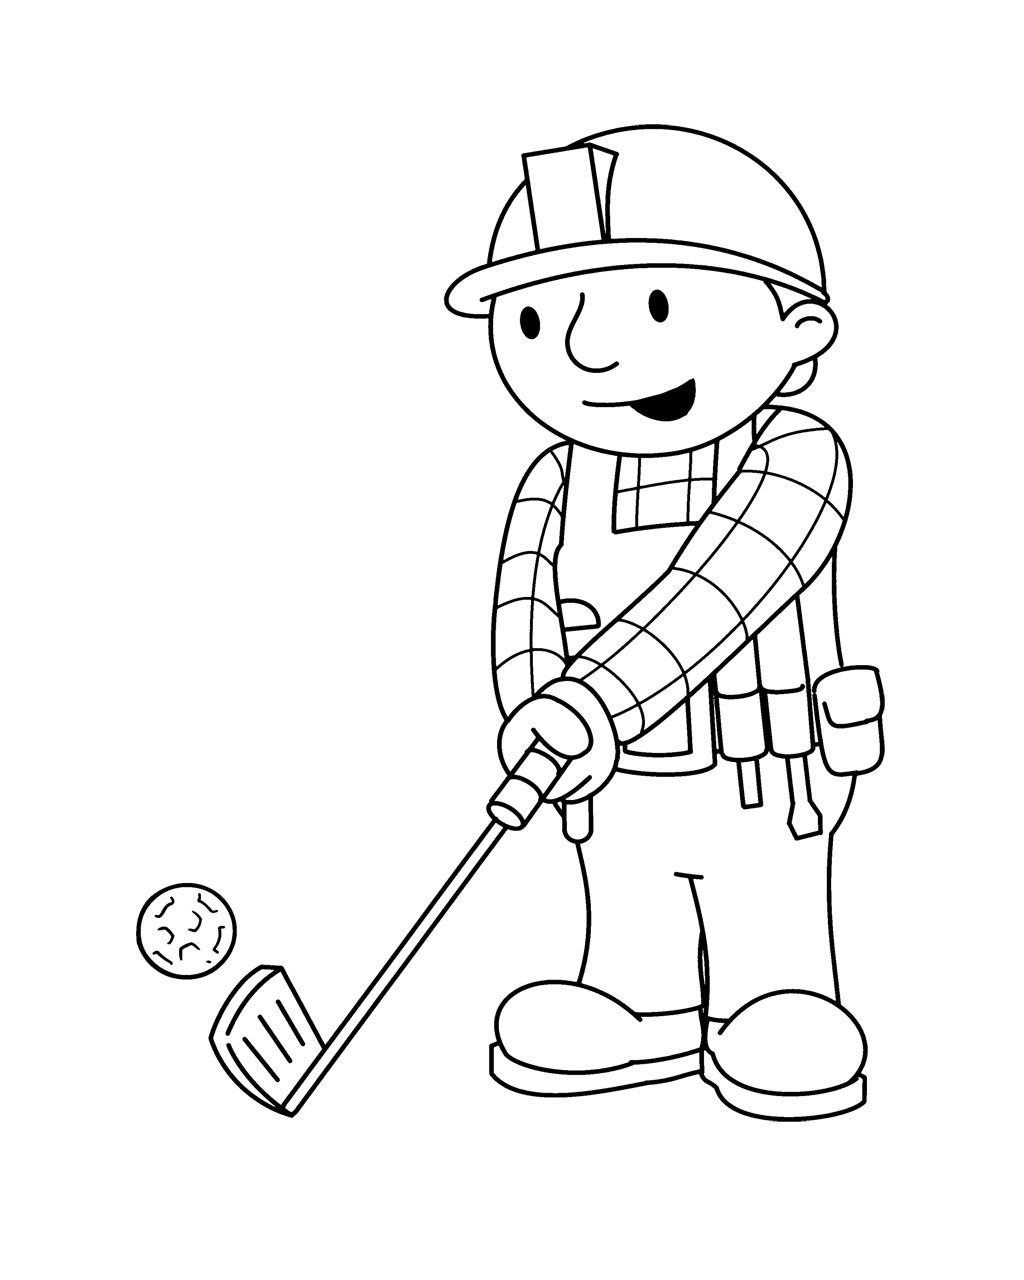 Coloring Sheet For Toddlers
 Golf Coloring Pages Best Coloring Pages For Kids